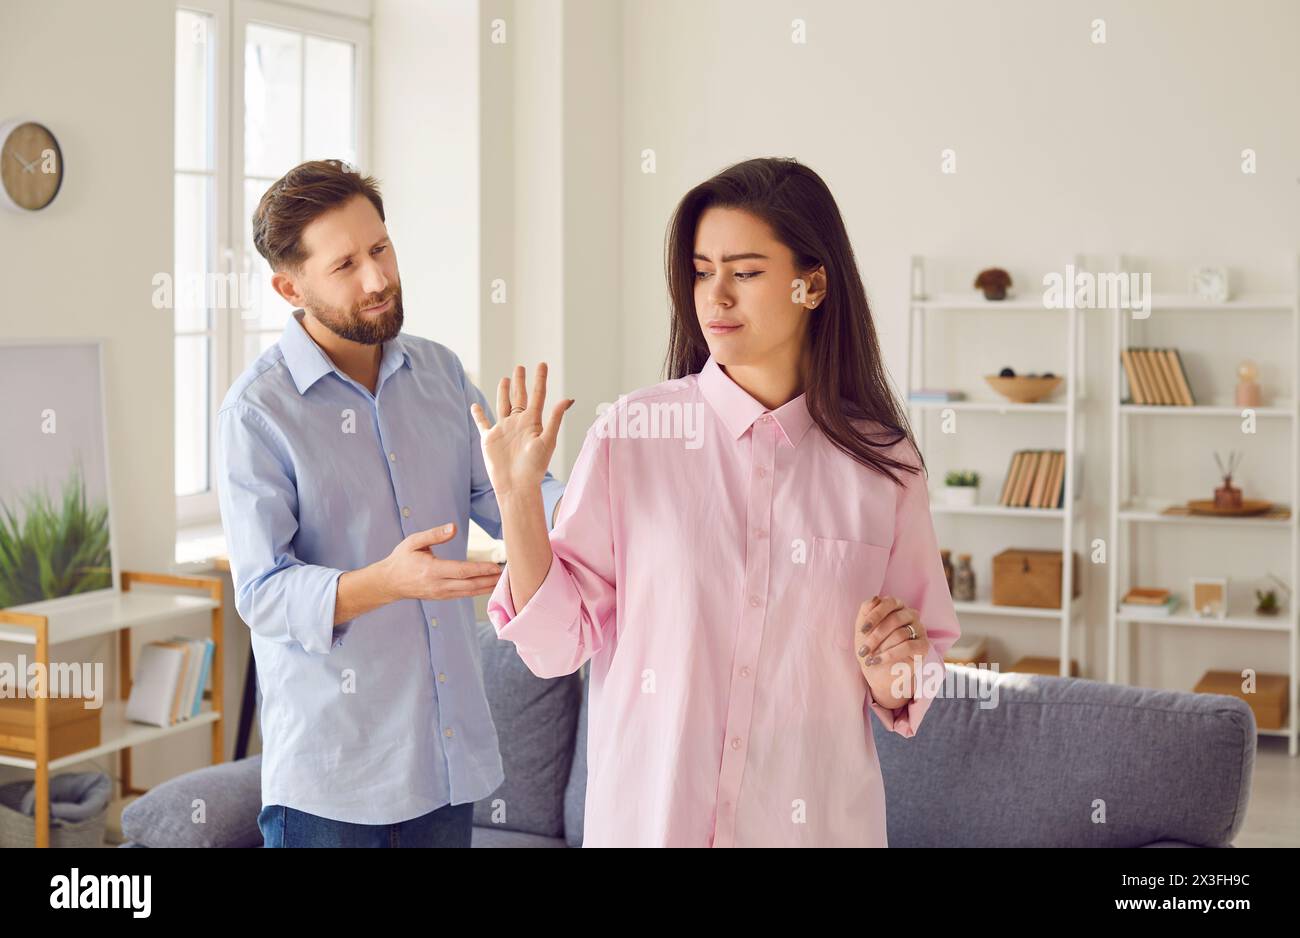 Emotionally stressed young couple arguing angrily at home during family conflict. Stock Photo